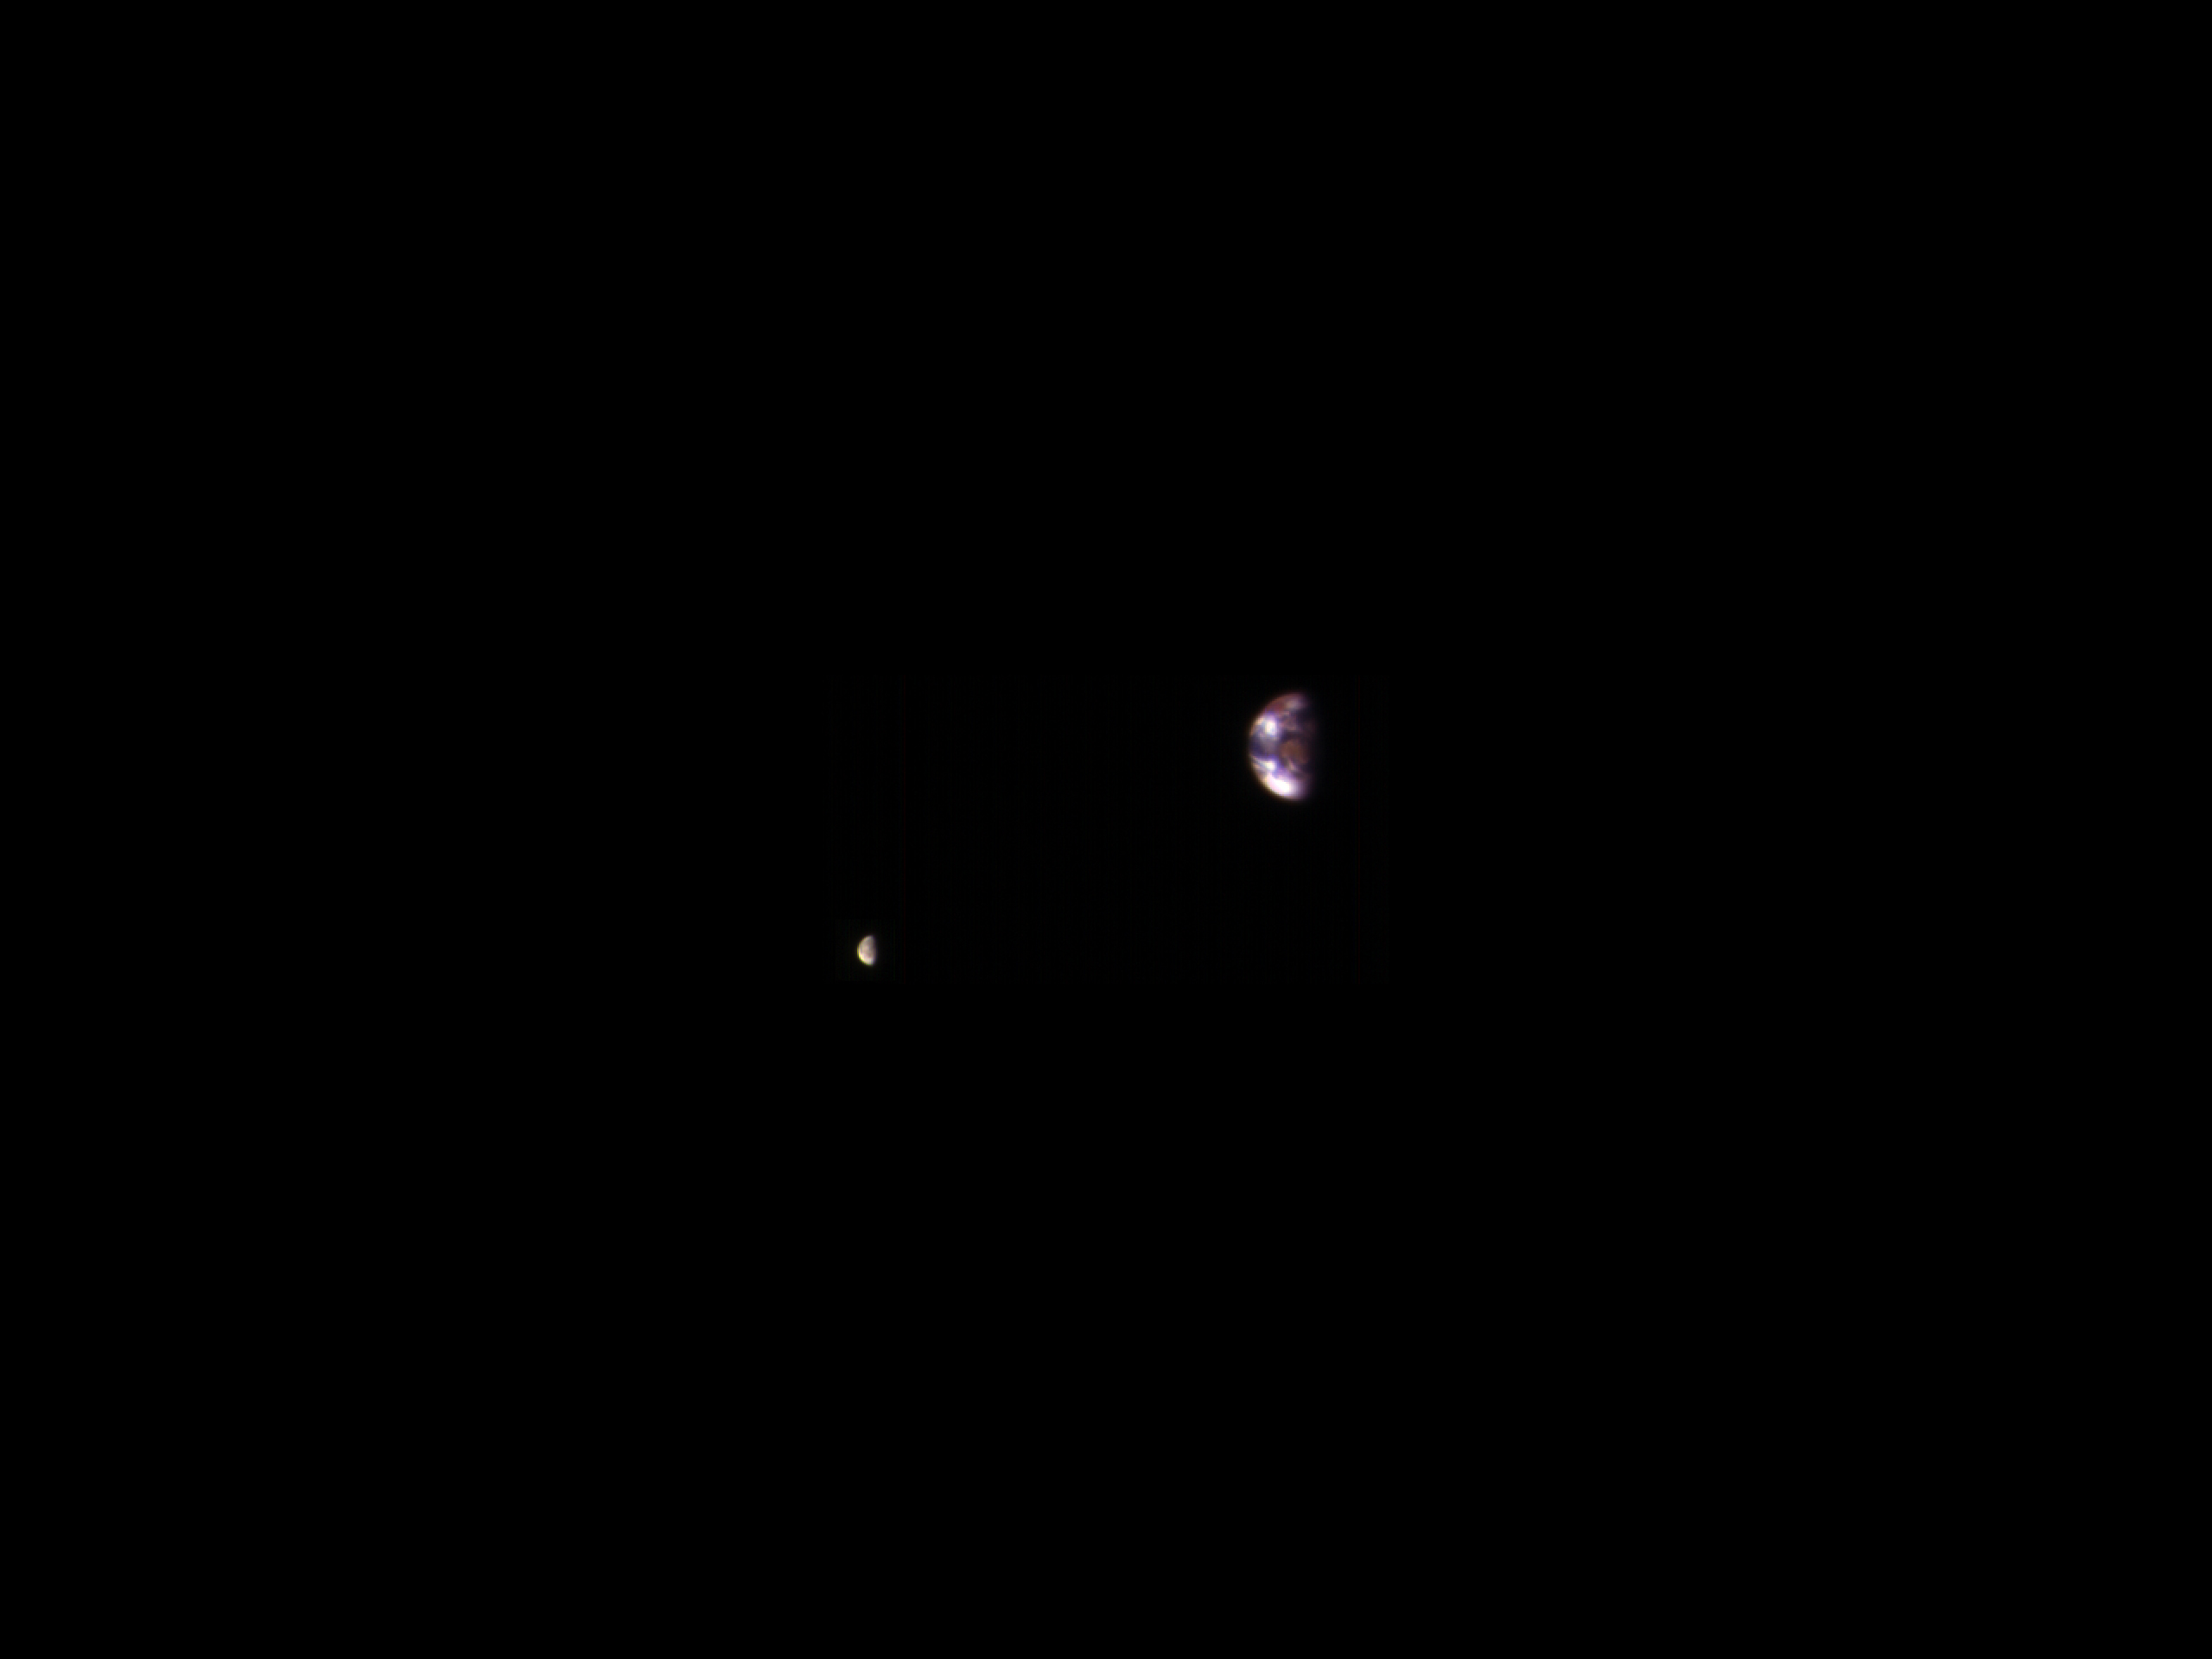 Earth and Moon Seen from Mars in November 2016